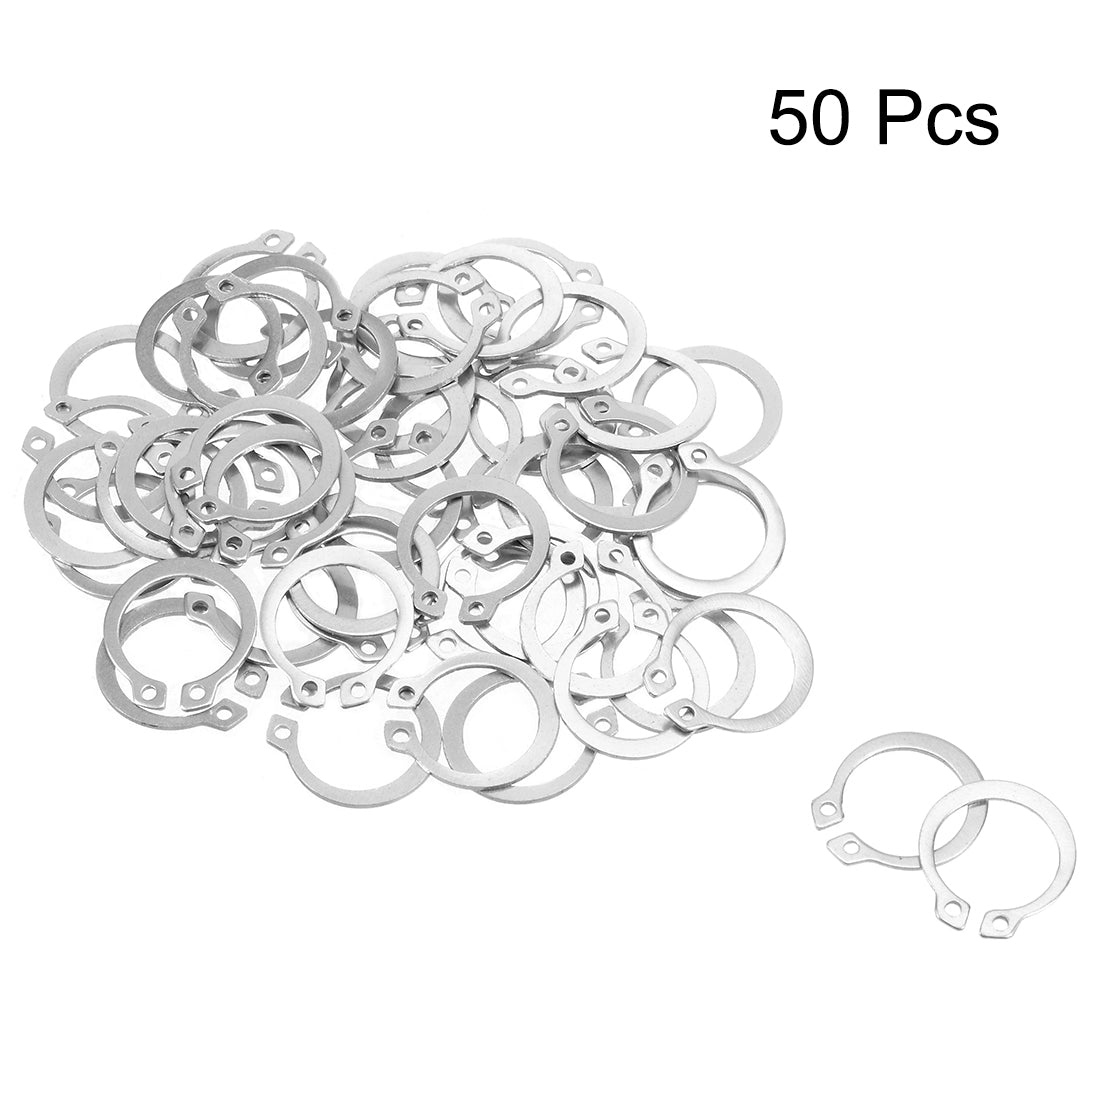 uxcell Uxcell 19.5mm External Circlips Retaining Shaft Snap Rings 304 Stainless Steel 50pcs